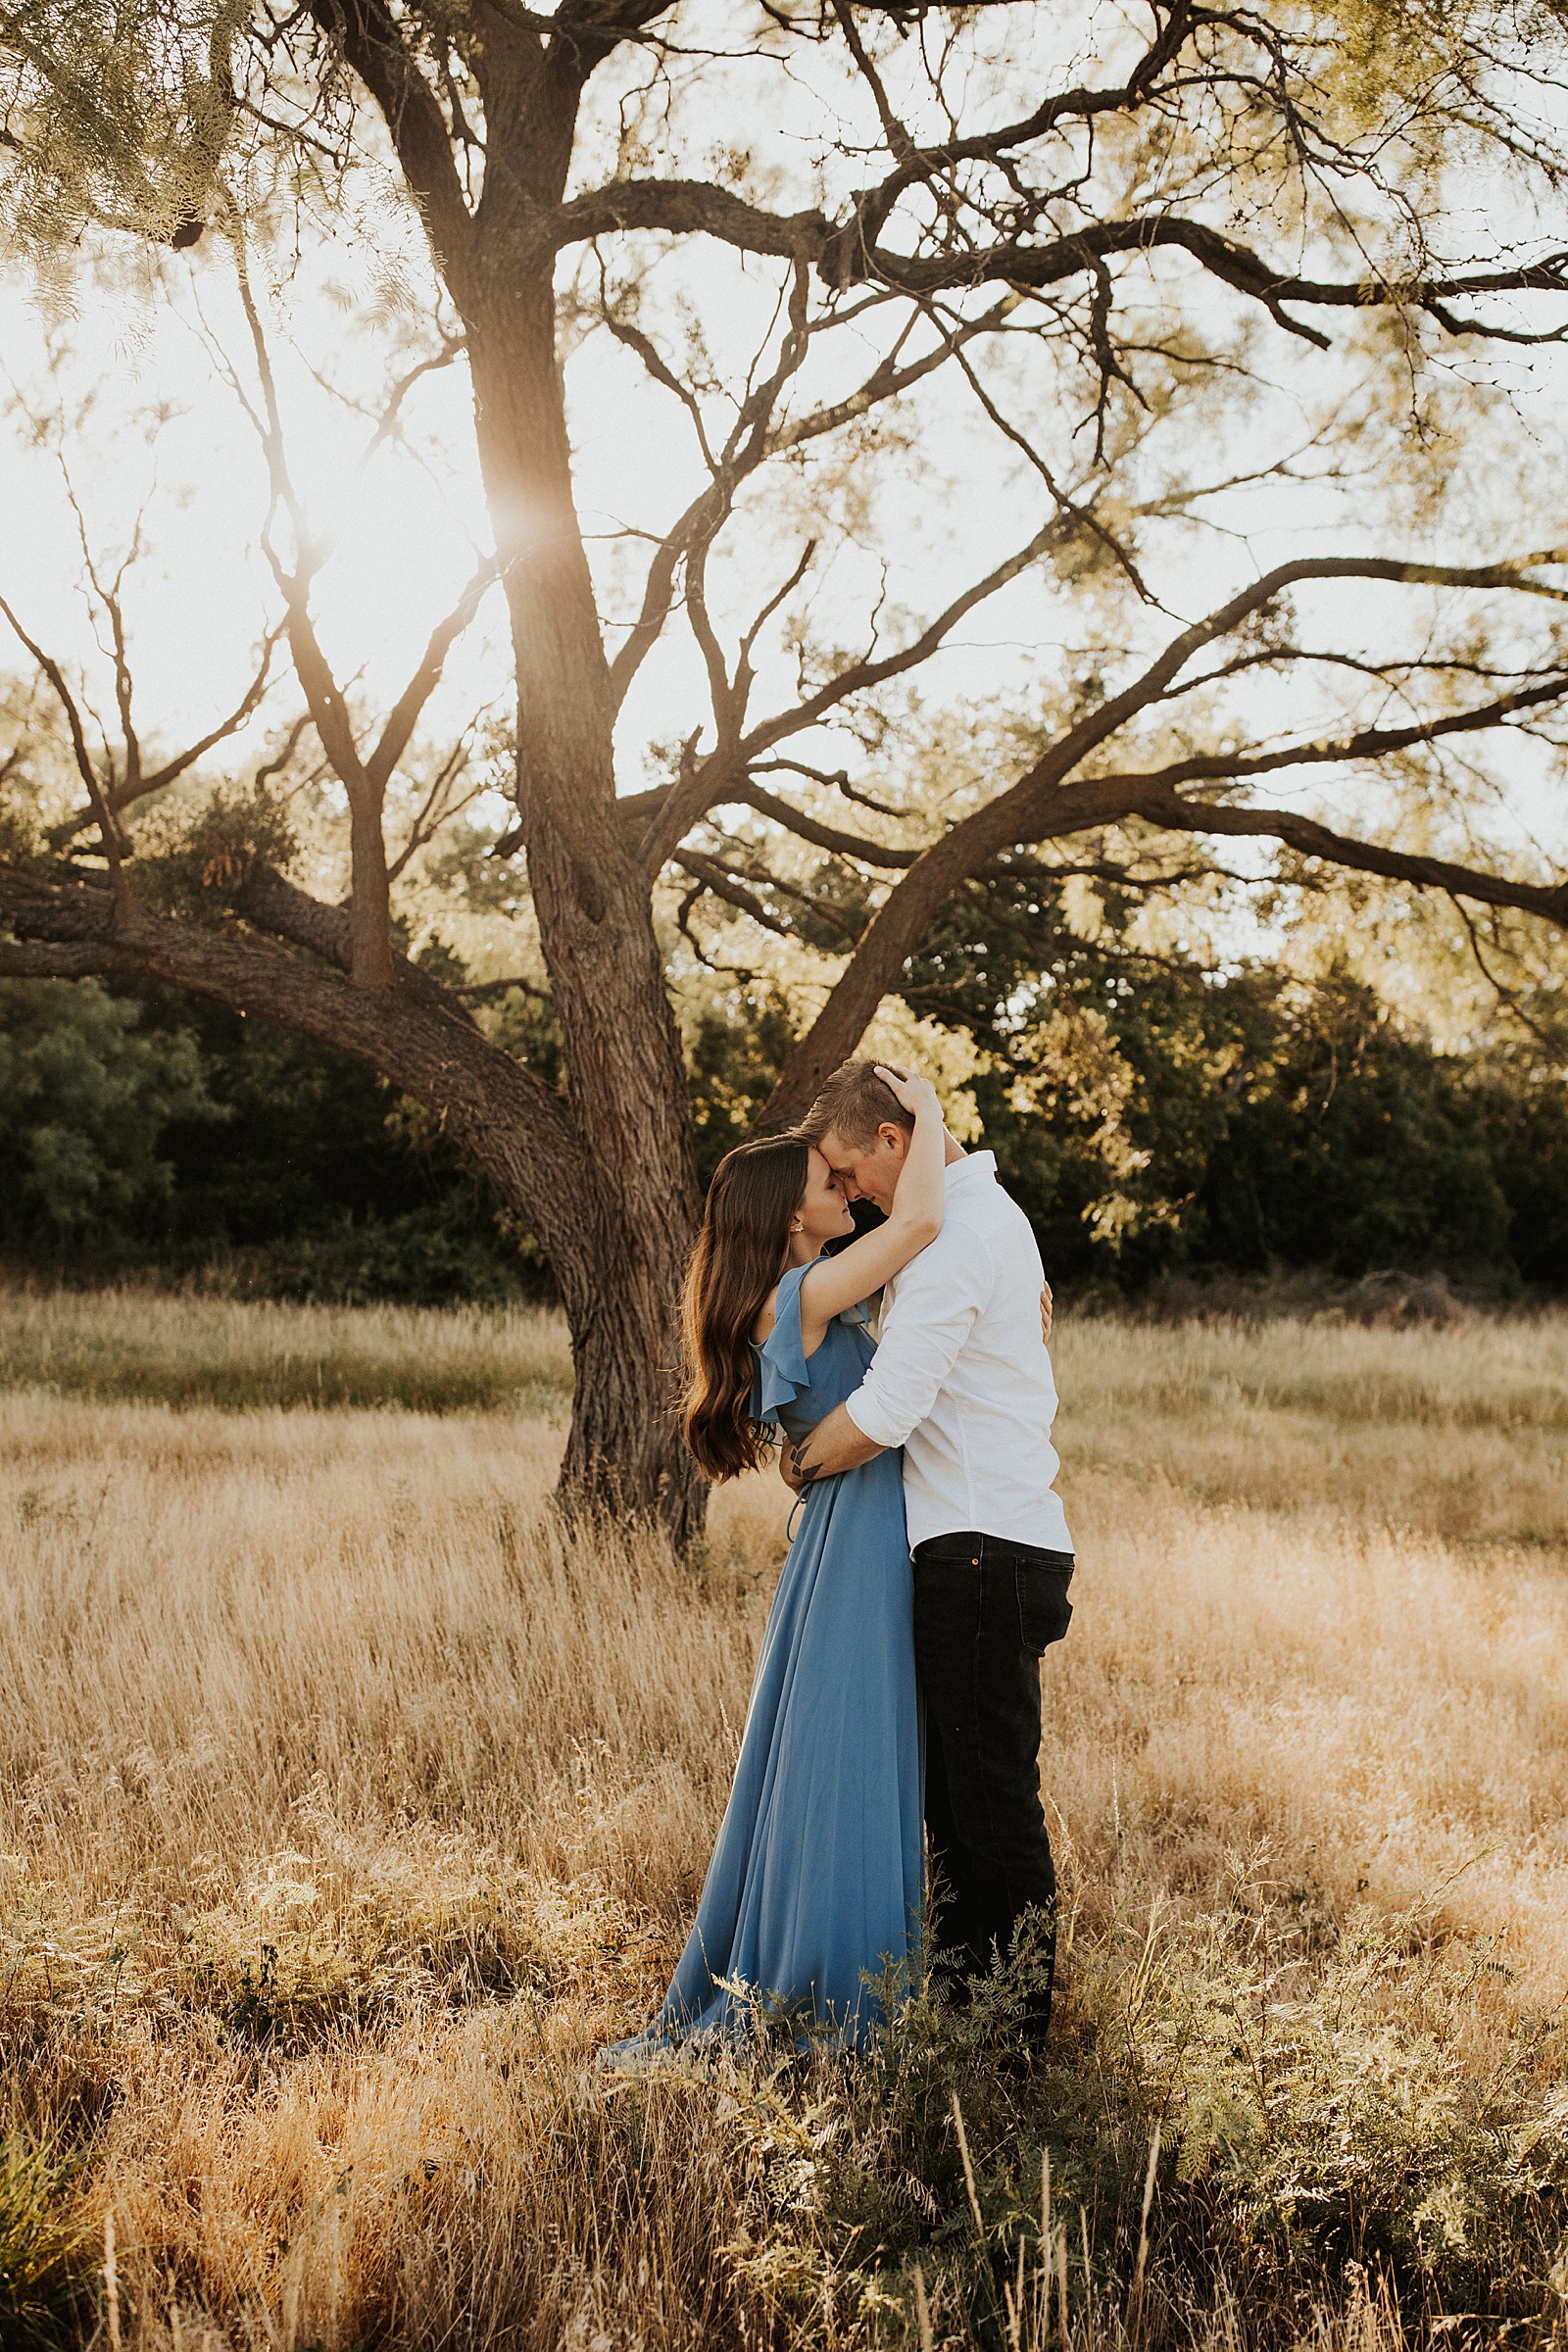 This Abilene TX engagement session actually includes the sweetest proposal!